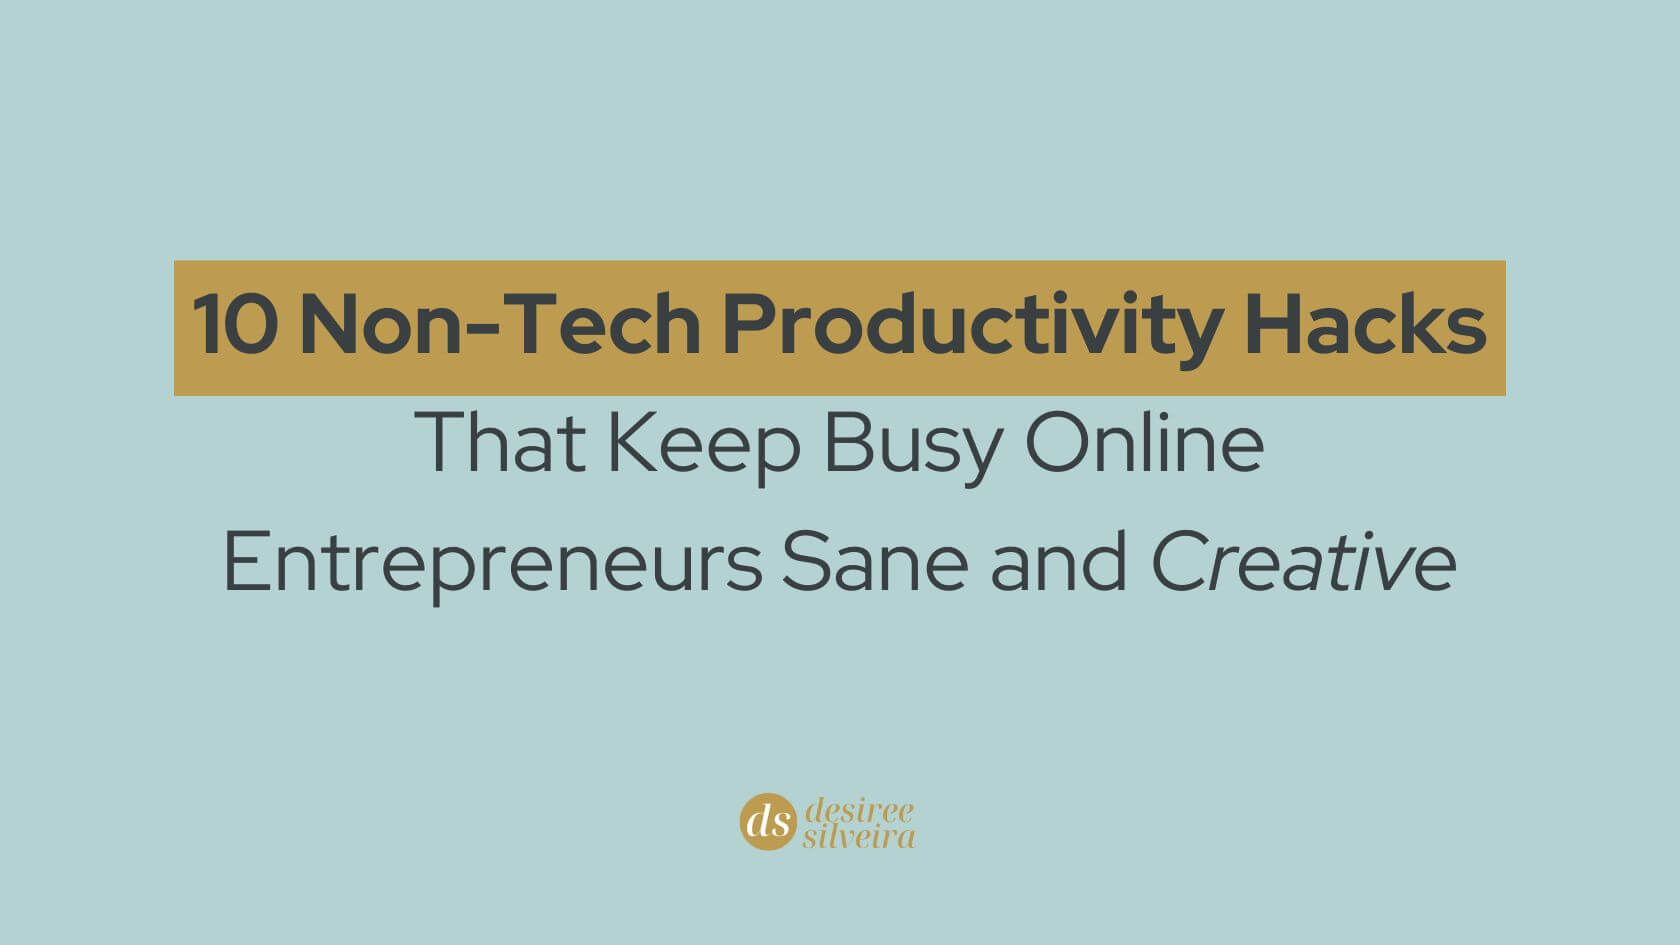 10 Non-Tech Productivity Hacks That Keep Busy Online Entrepreneurs Sane and Creative